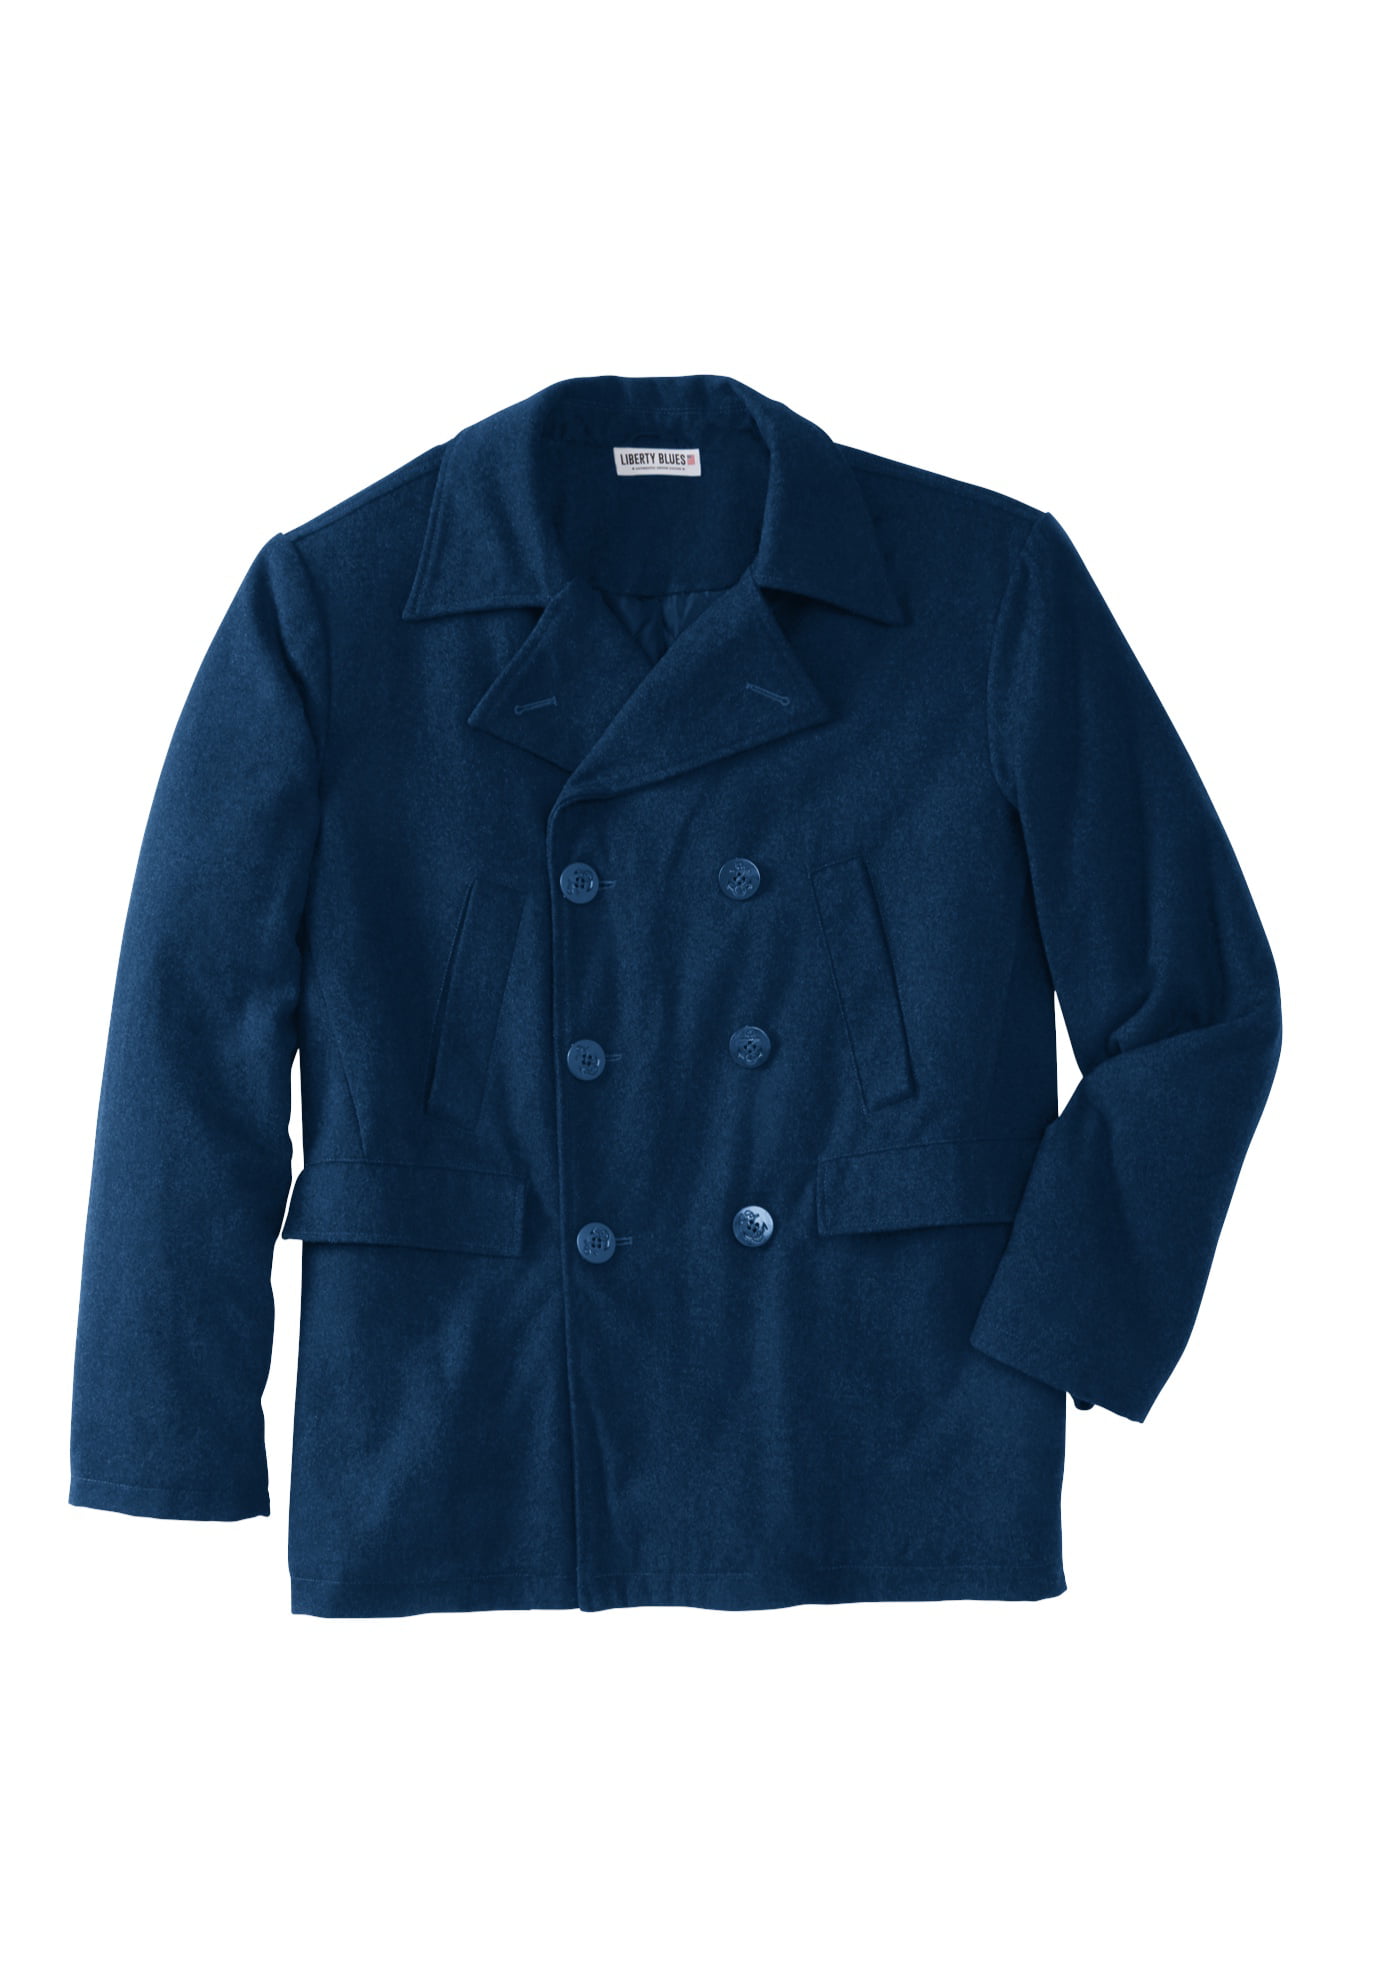 KingSize Mens Big & Tall Double-Breasted Wool Peacoat 